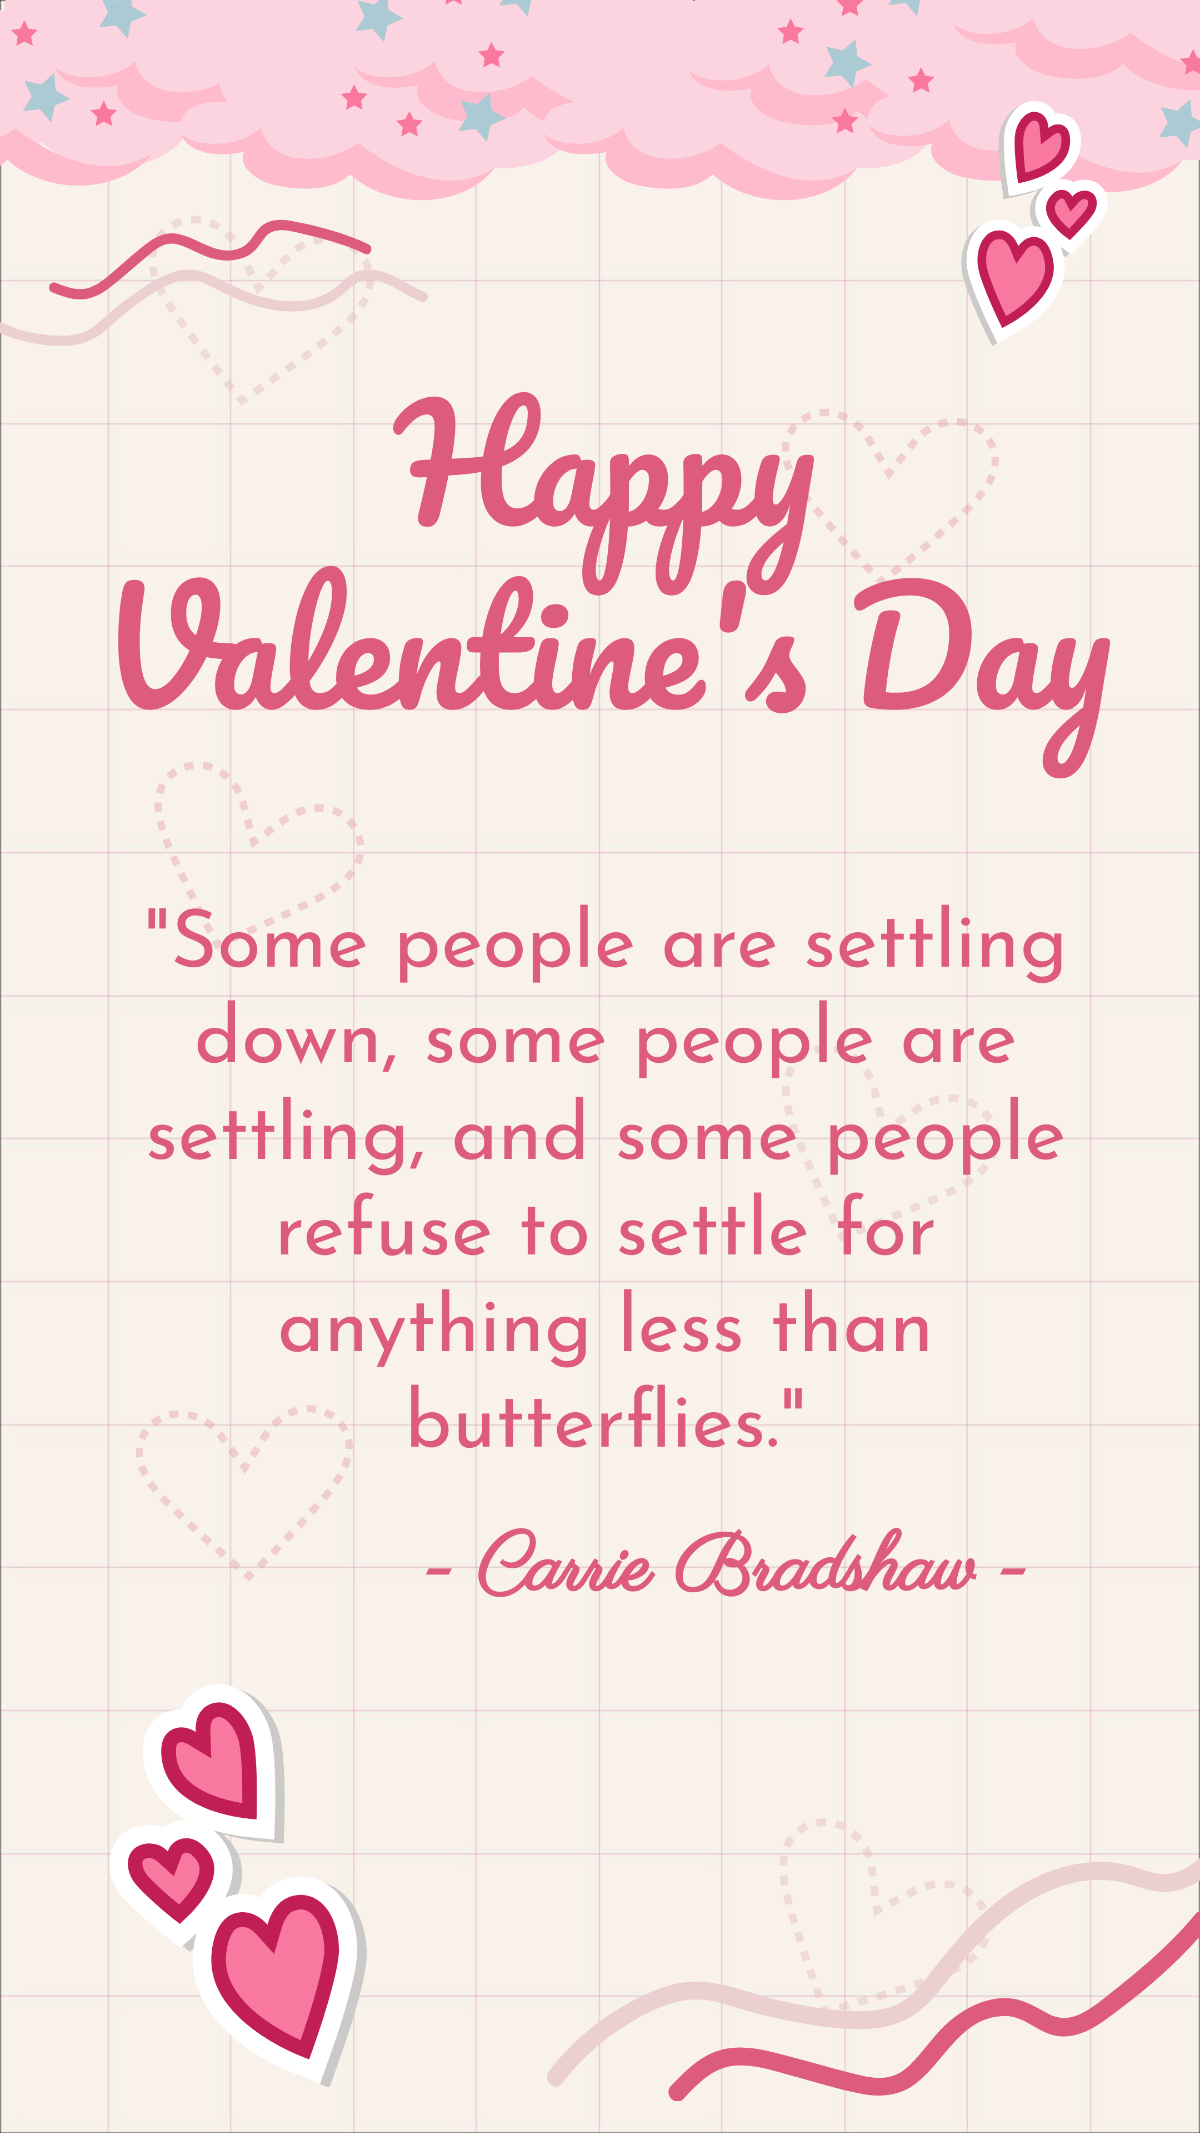 Valentine's Day for Singles Quotes Template